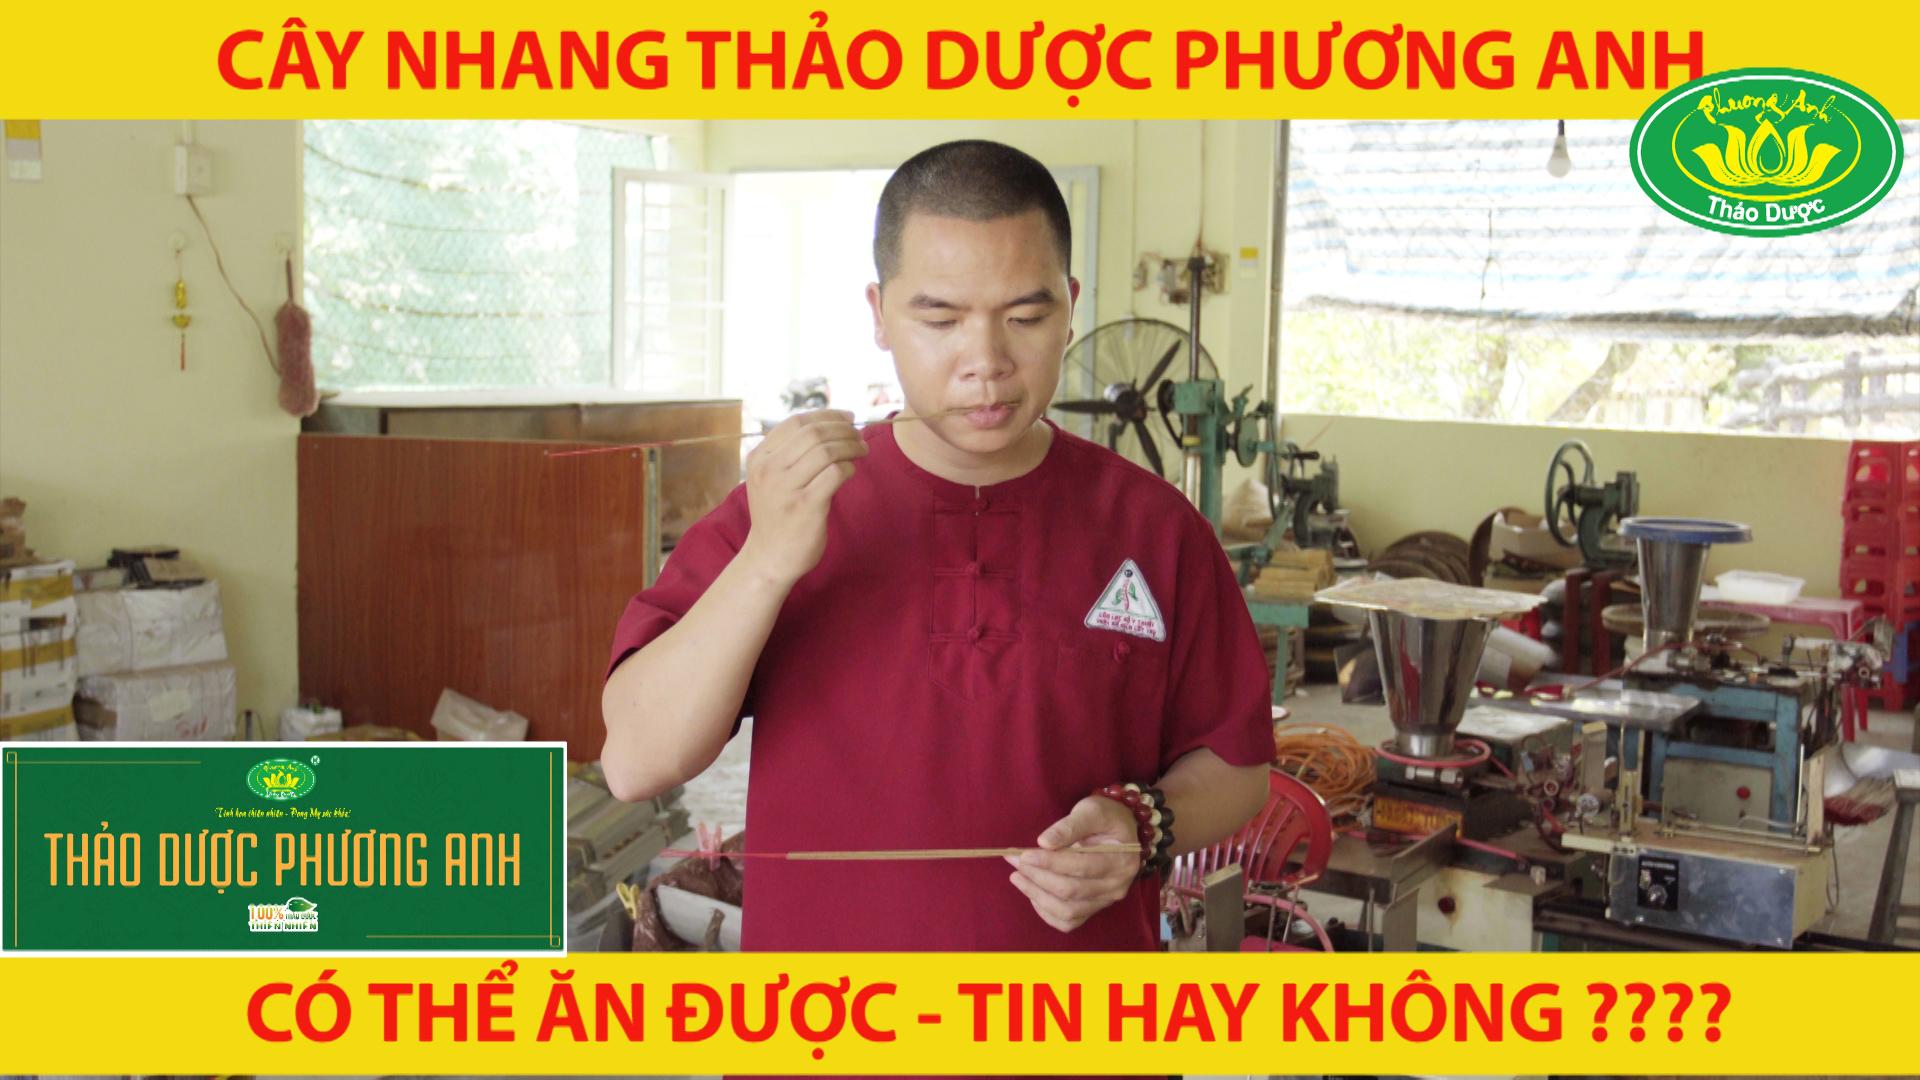 nhang phuong anh co the an duoc